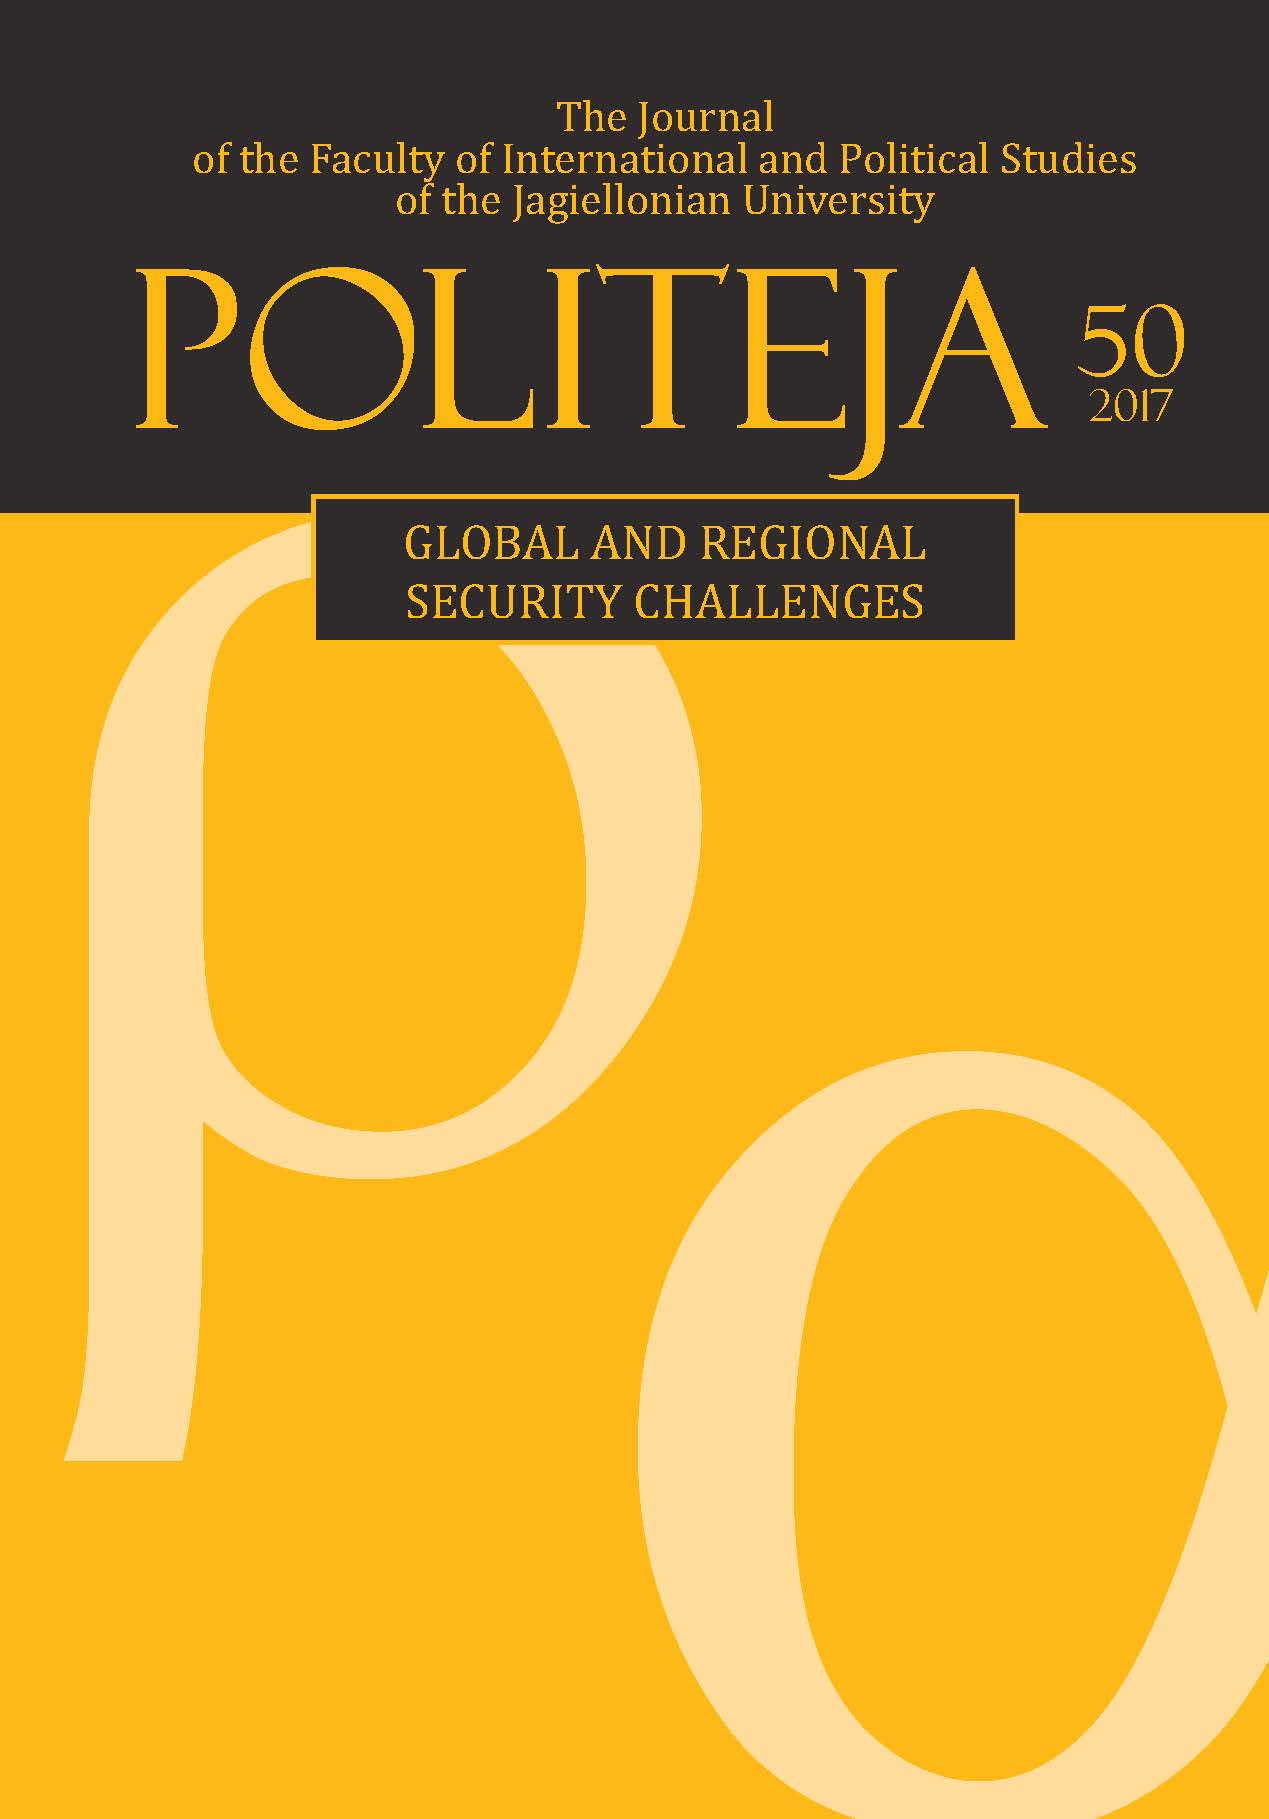 					View Vol. 14 No. 5 (50) (2017): Global and Regional Security Challenges
				